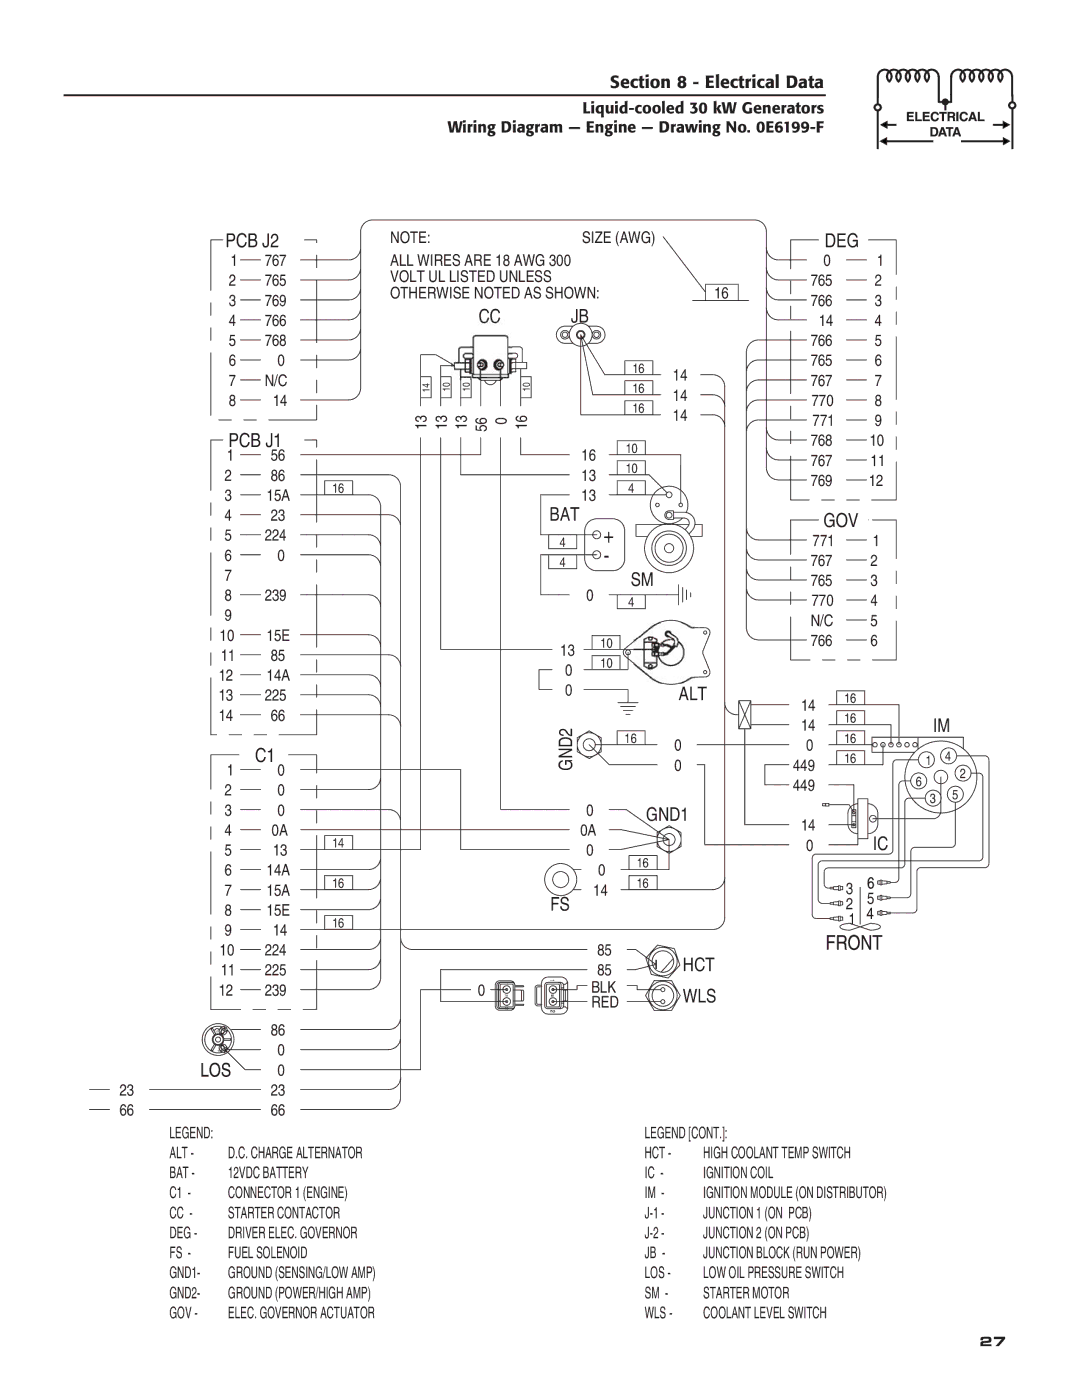 Guardian Technologies 004988-4 owner manual Otherwise Noted AS Shown, Bat, Ignition Coil, On PCB, Los, Starter Motor, Wls 